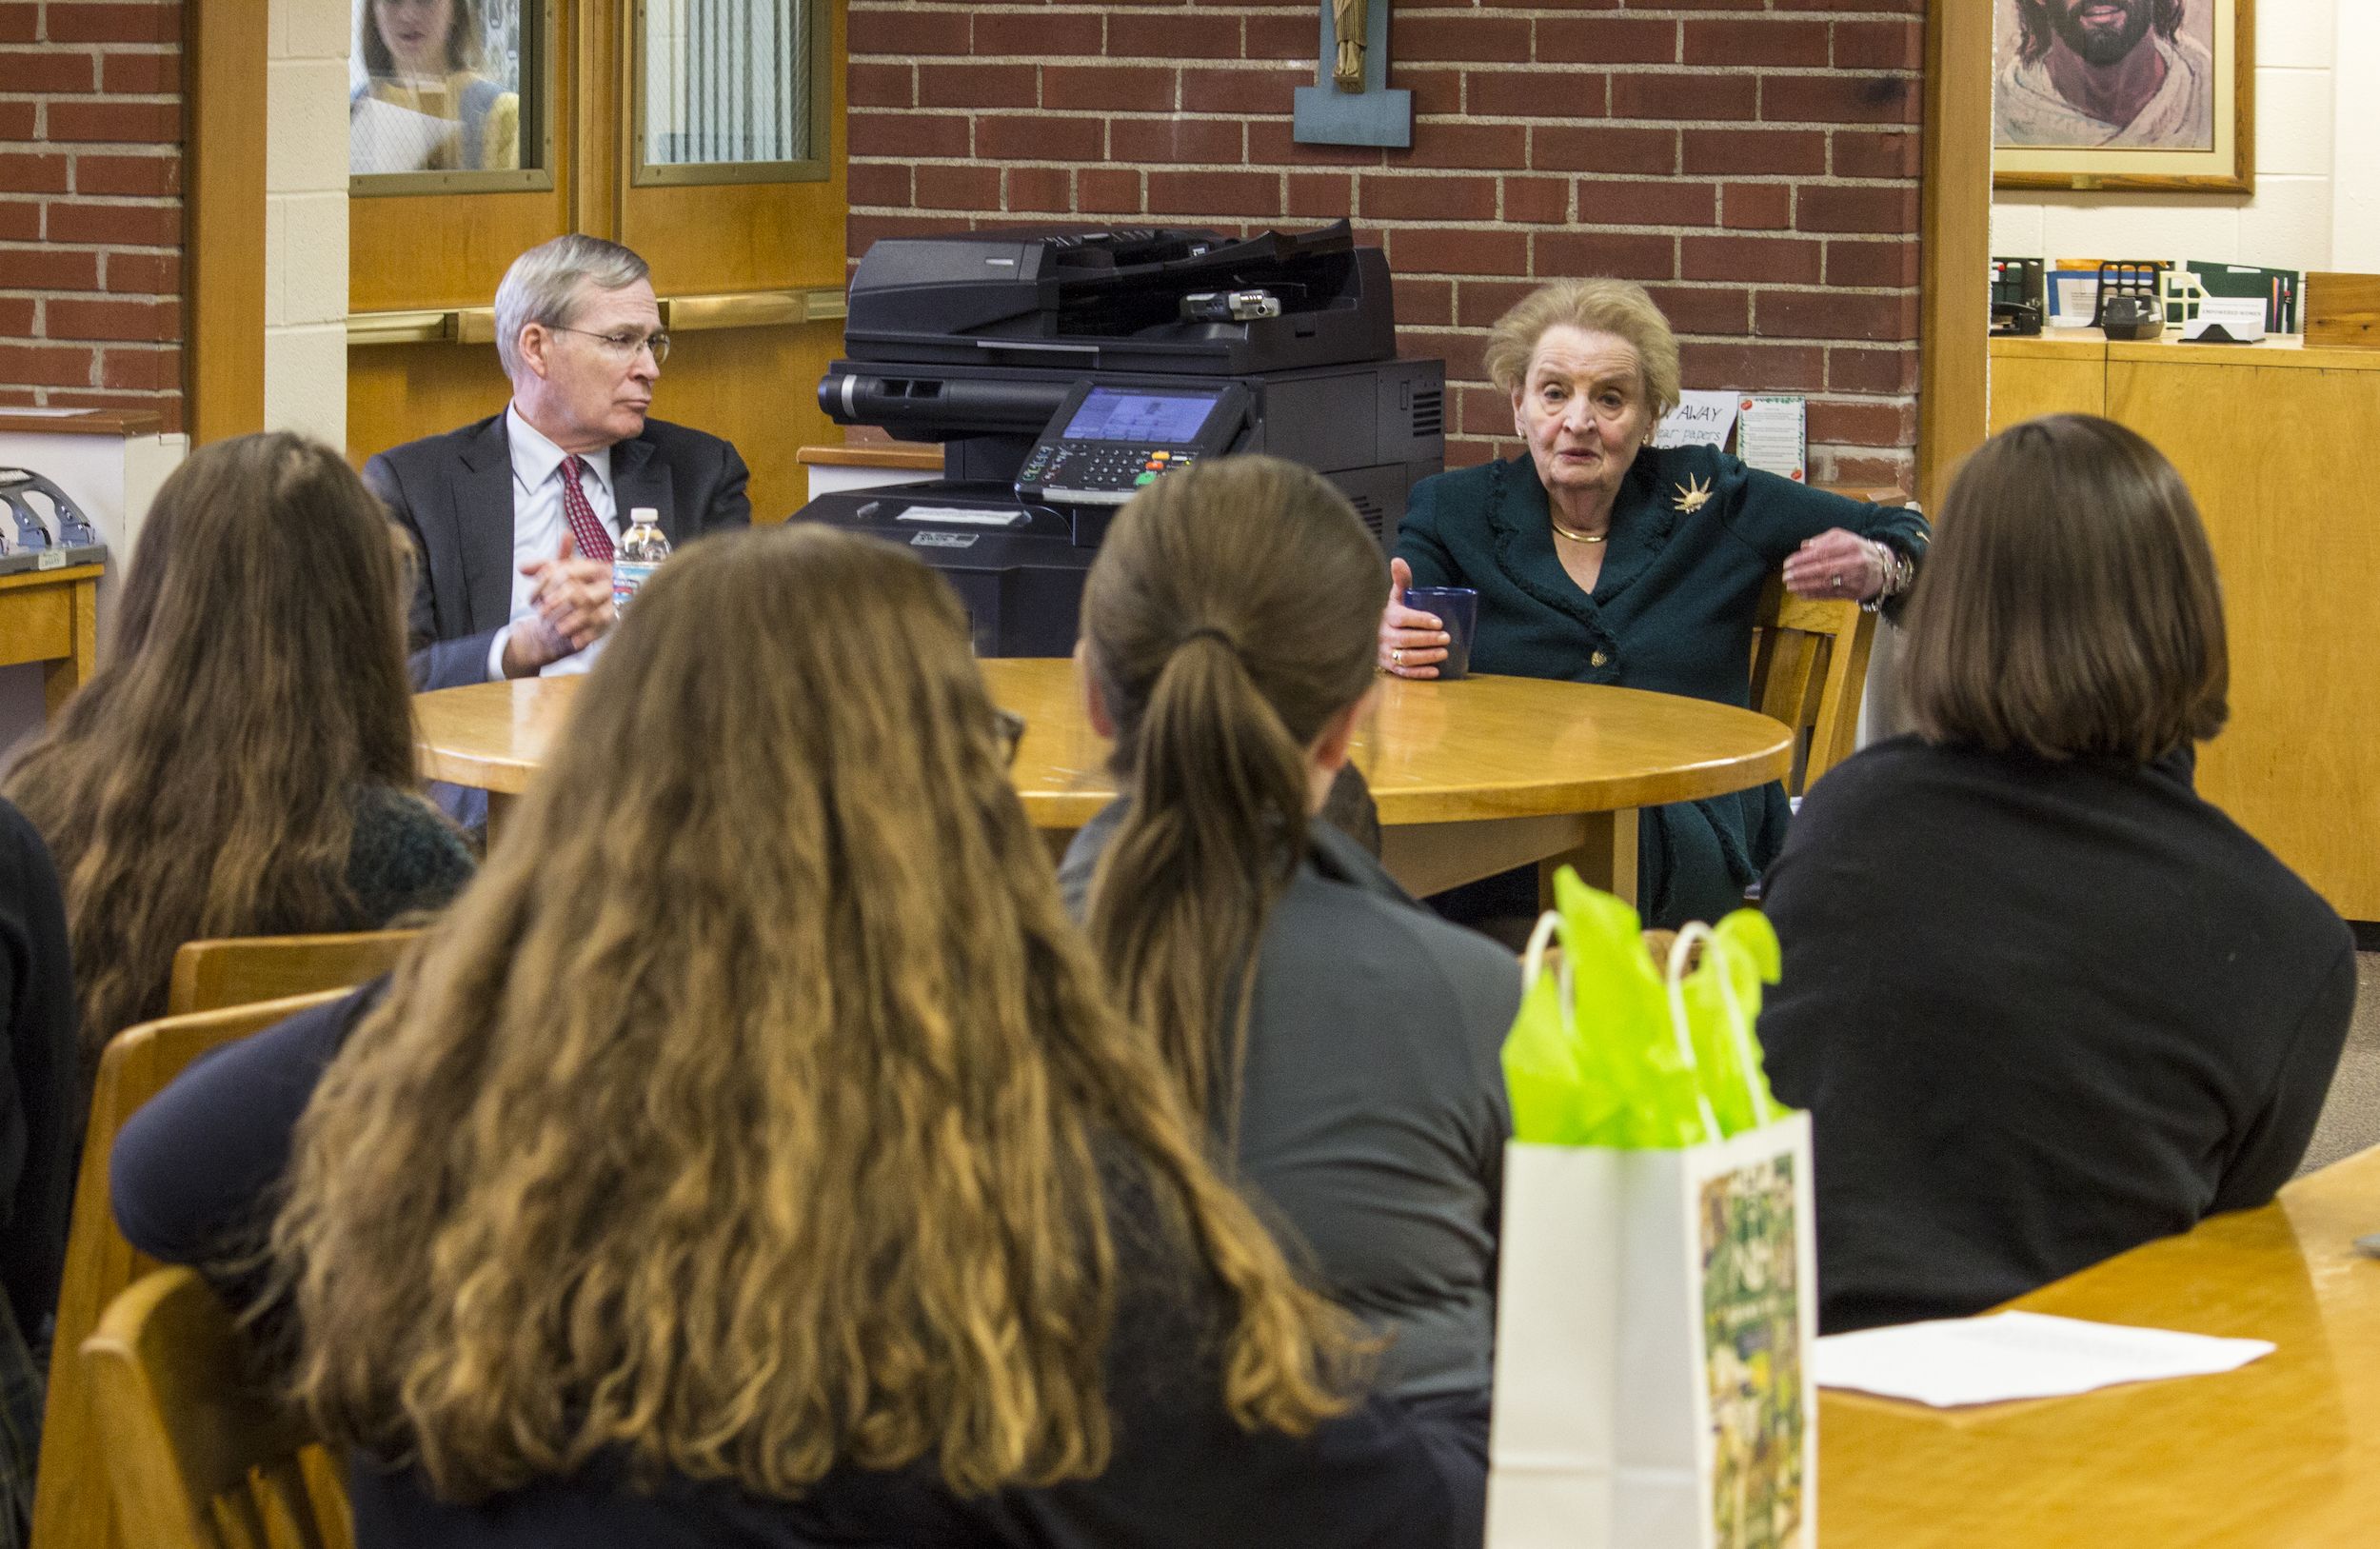 Students share their thoughts about the Middle East Strategy Task Force executive summary with Madeleine Albright and Stephen Hadley at Nerinx Hall High School in St. Louis, Missouri. Image by Lauren Shepherd, United States, 2017.